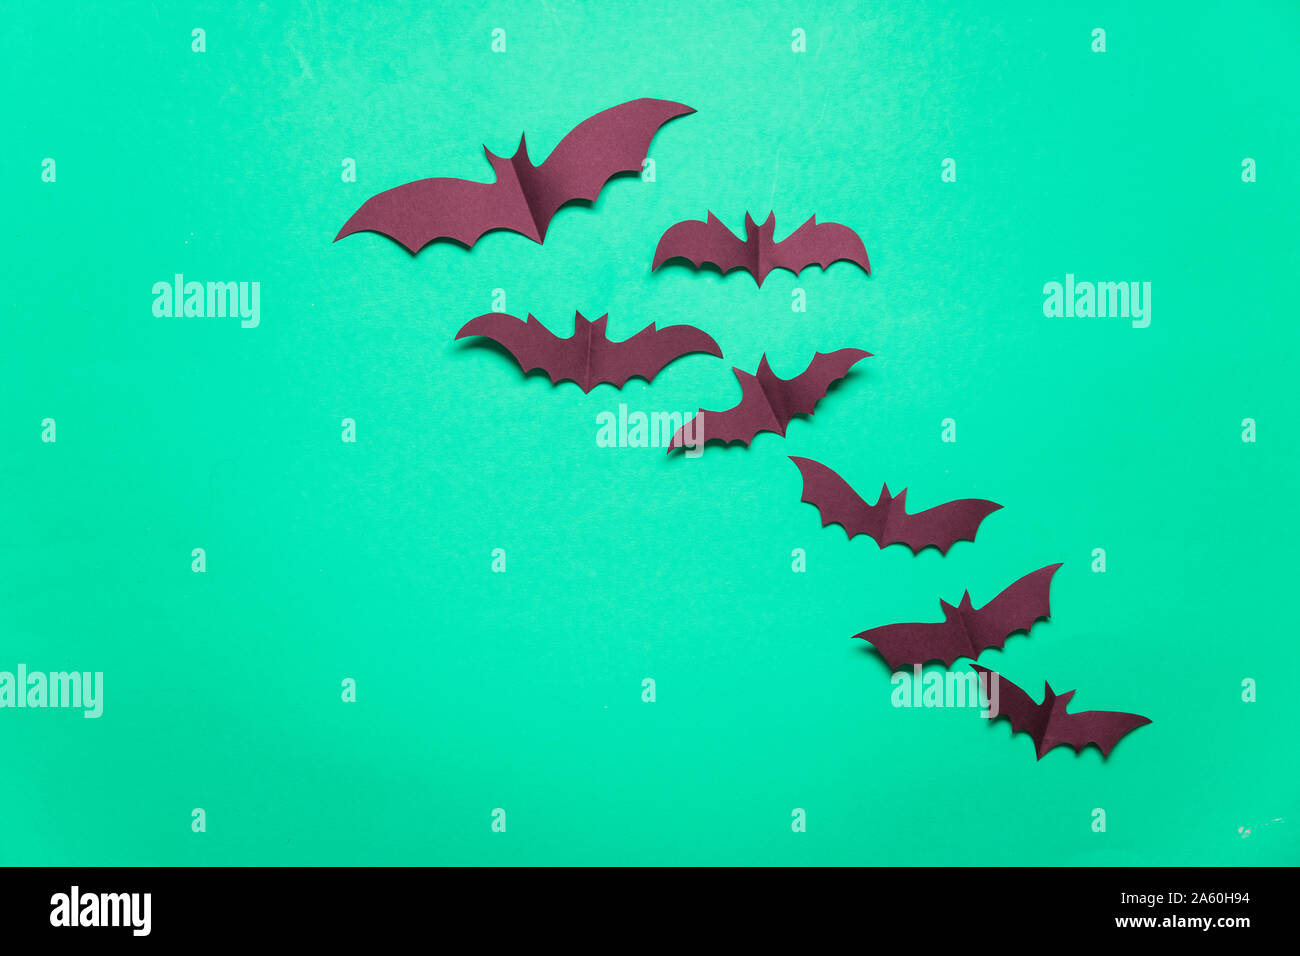 Halloween paper vampire bat decorations on a green background. Stock Photo